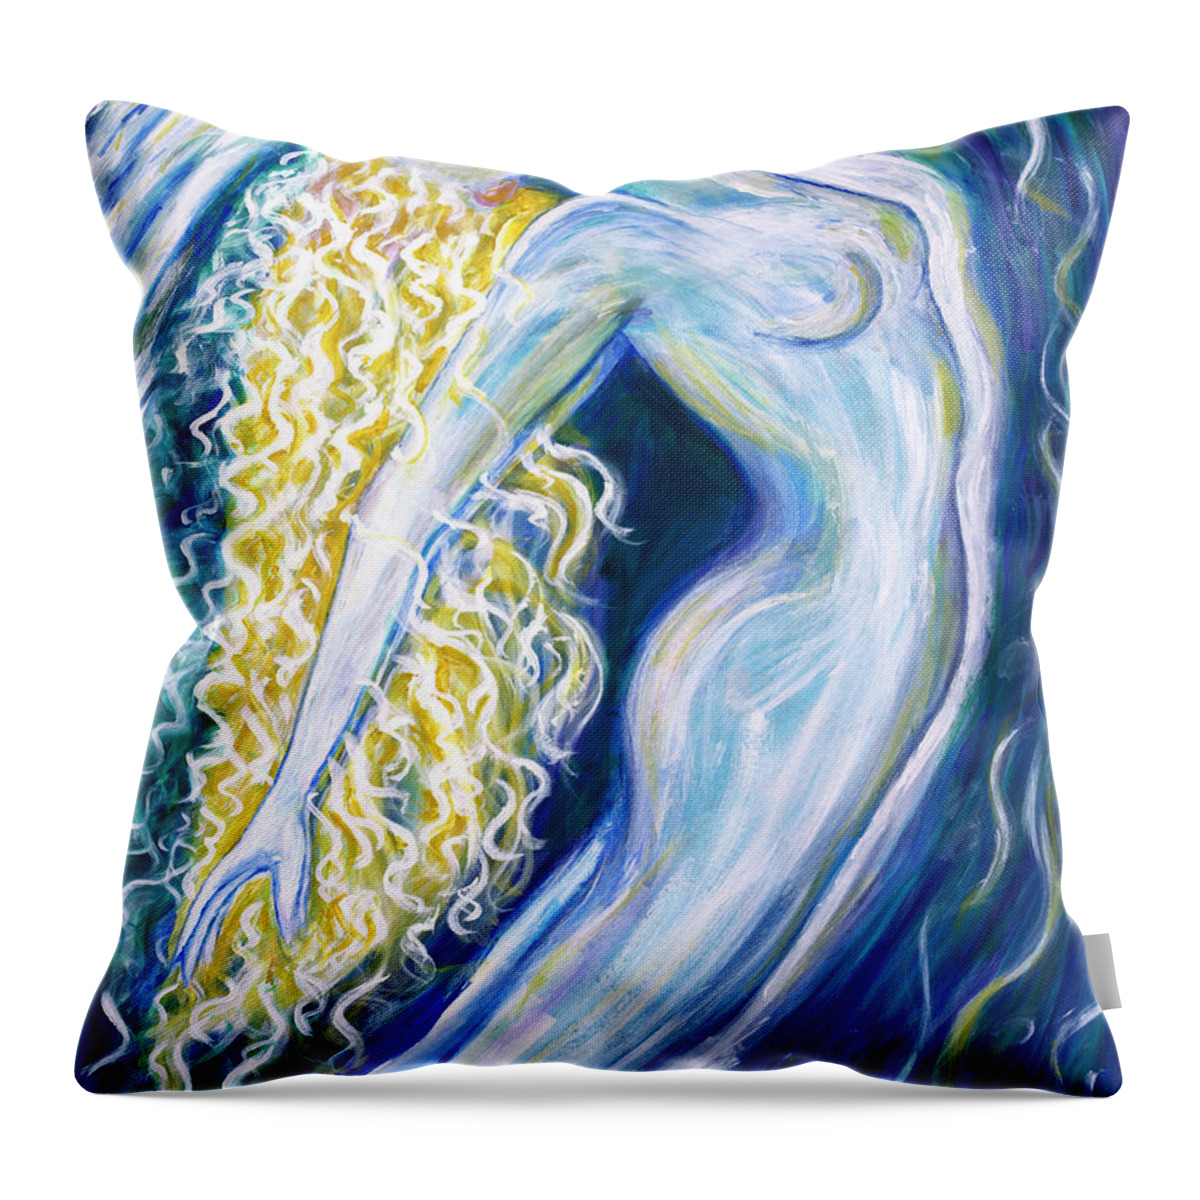 Lady Underwater Throw Pillow featuring the painting Probing the Depths by Anya Heller